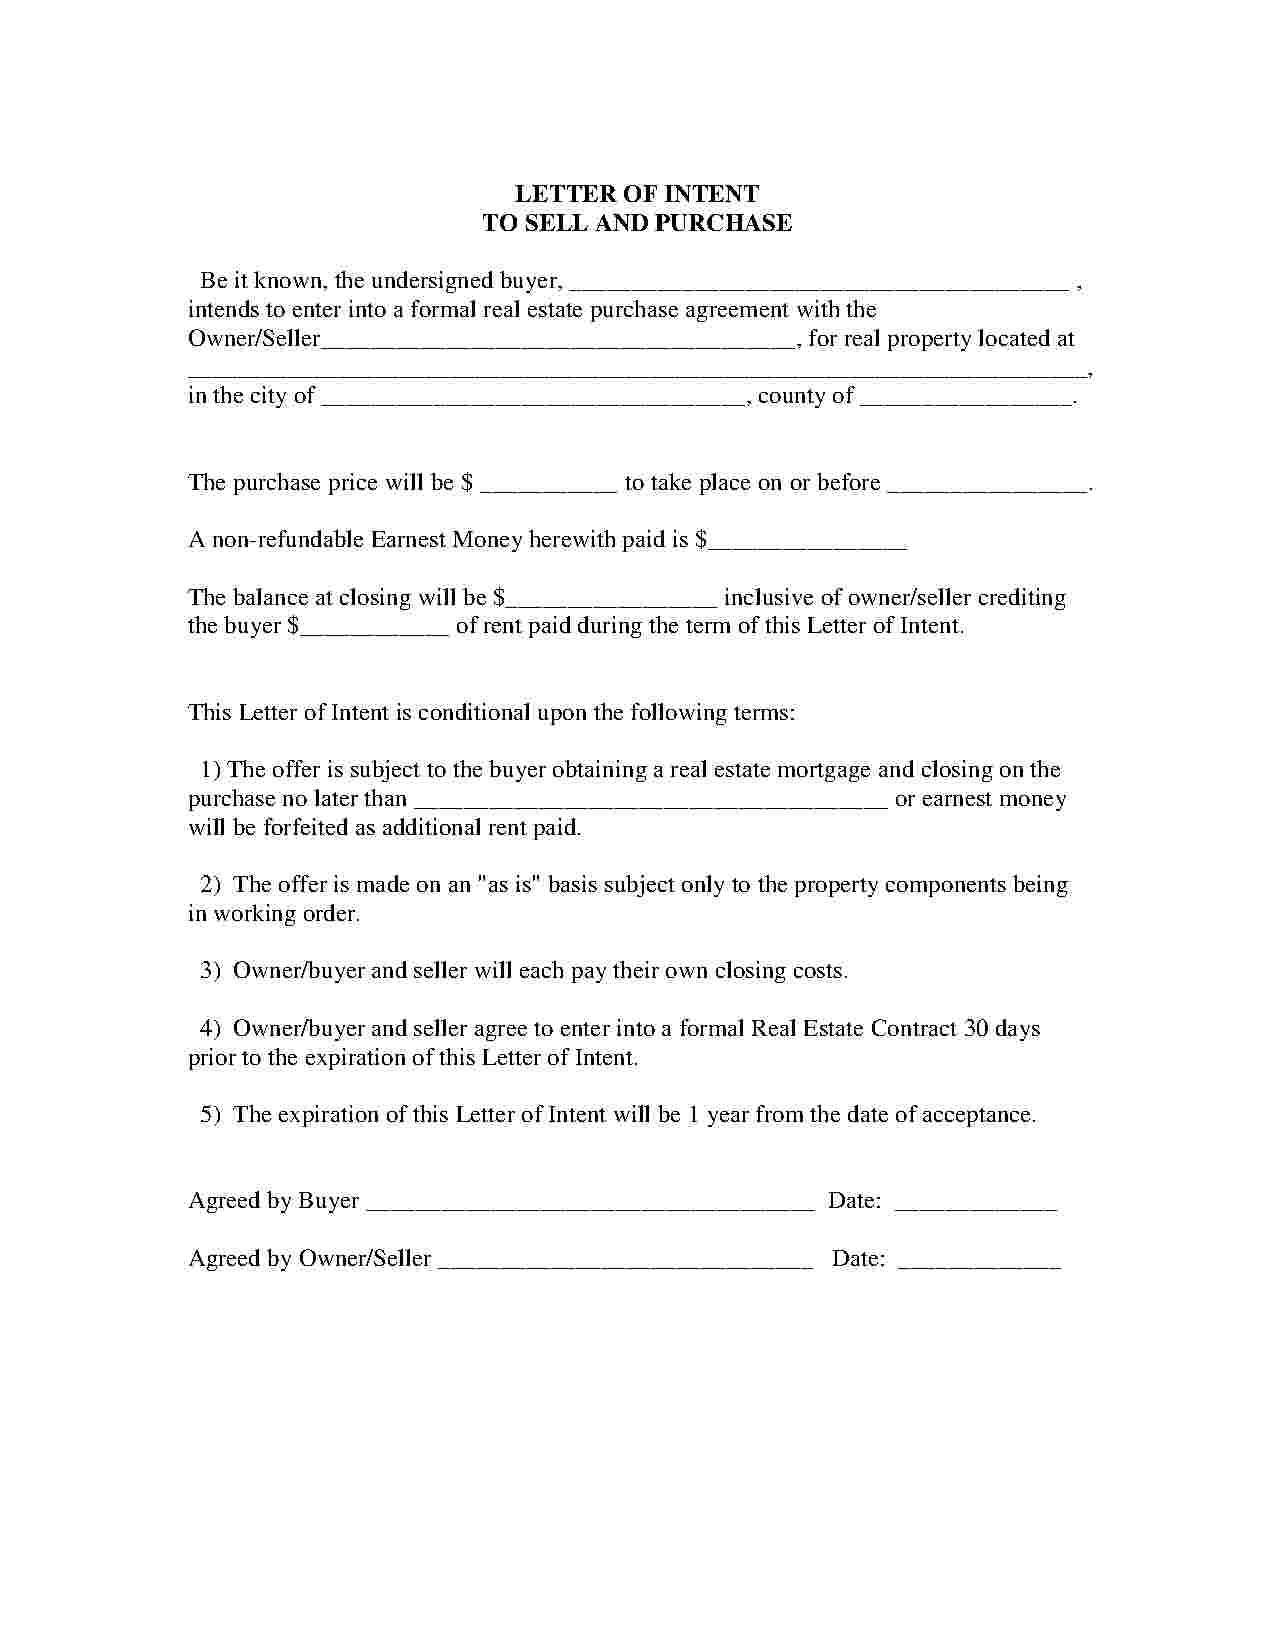 free-printable-real-estate-purchase-agreement-form-printable-forms